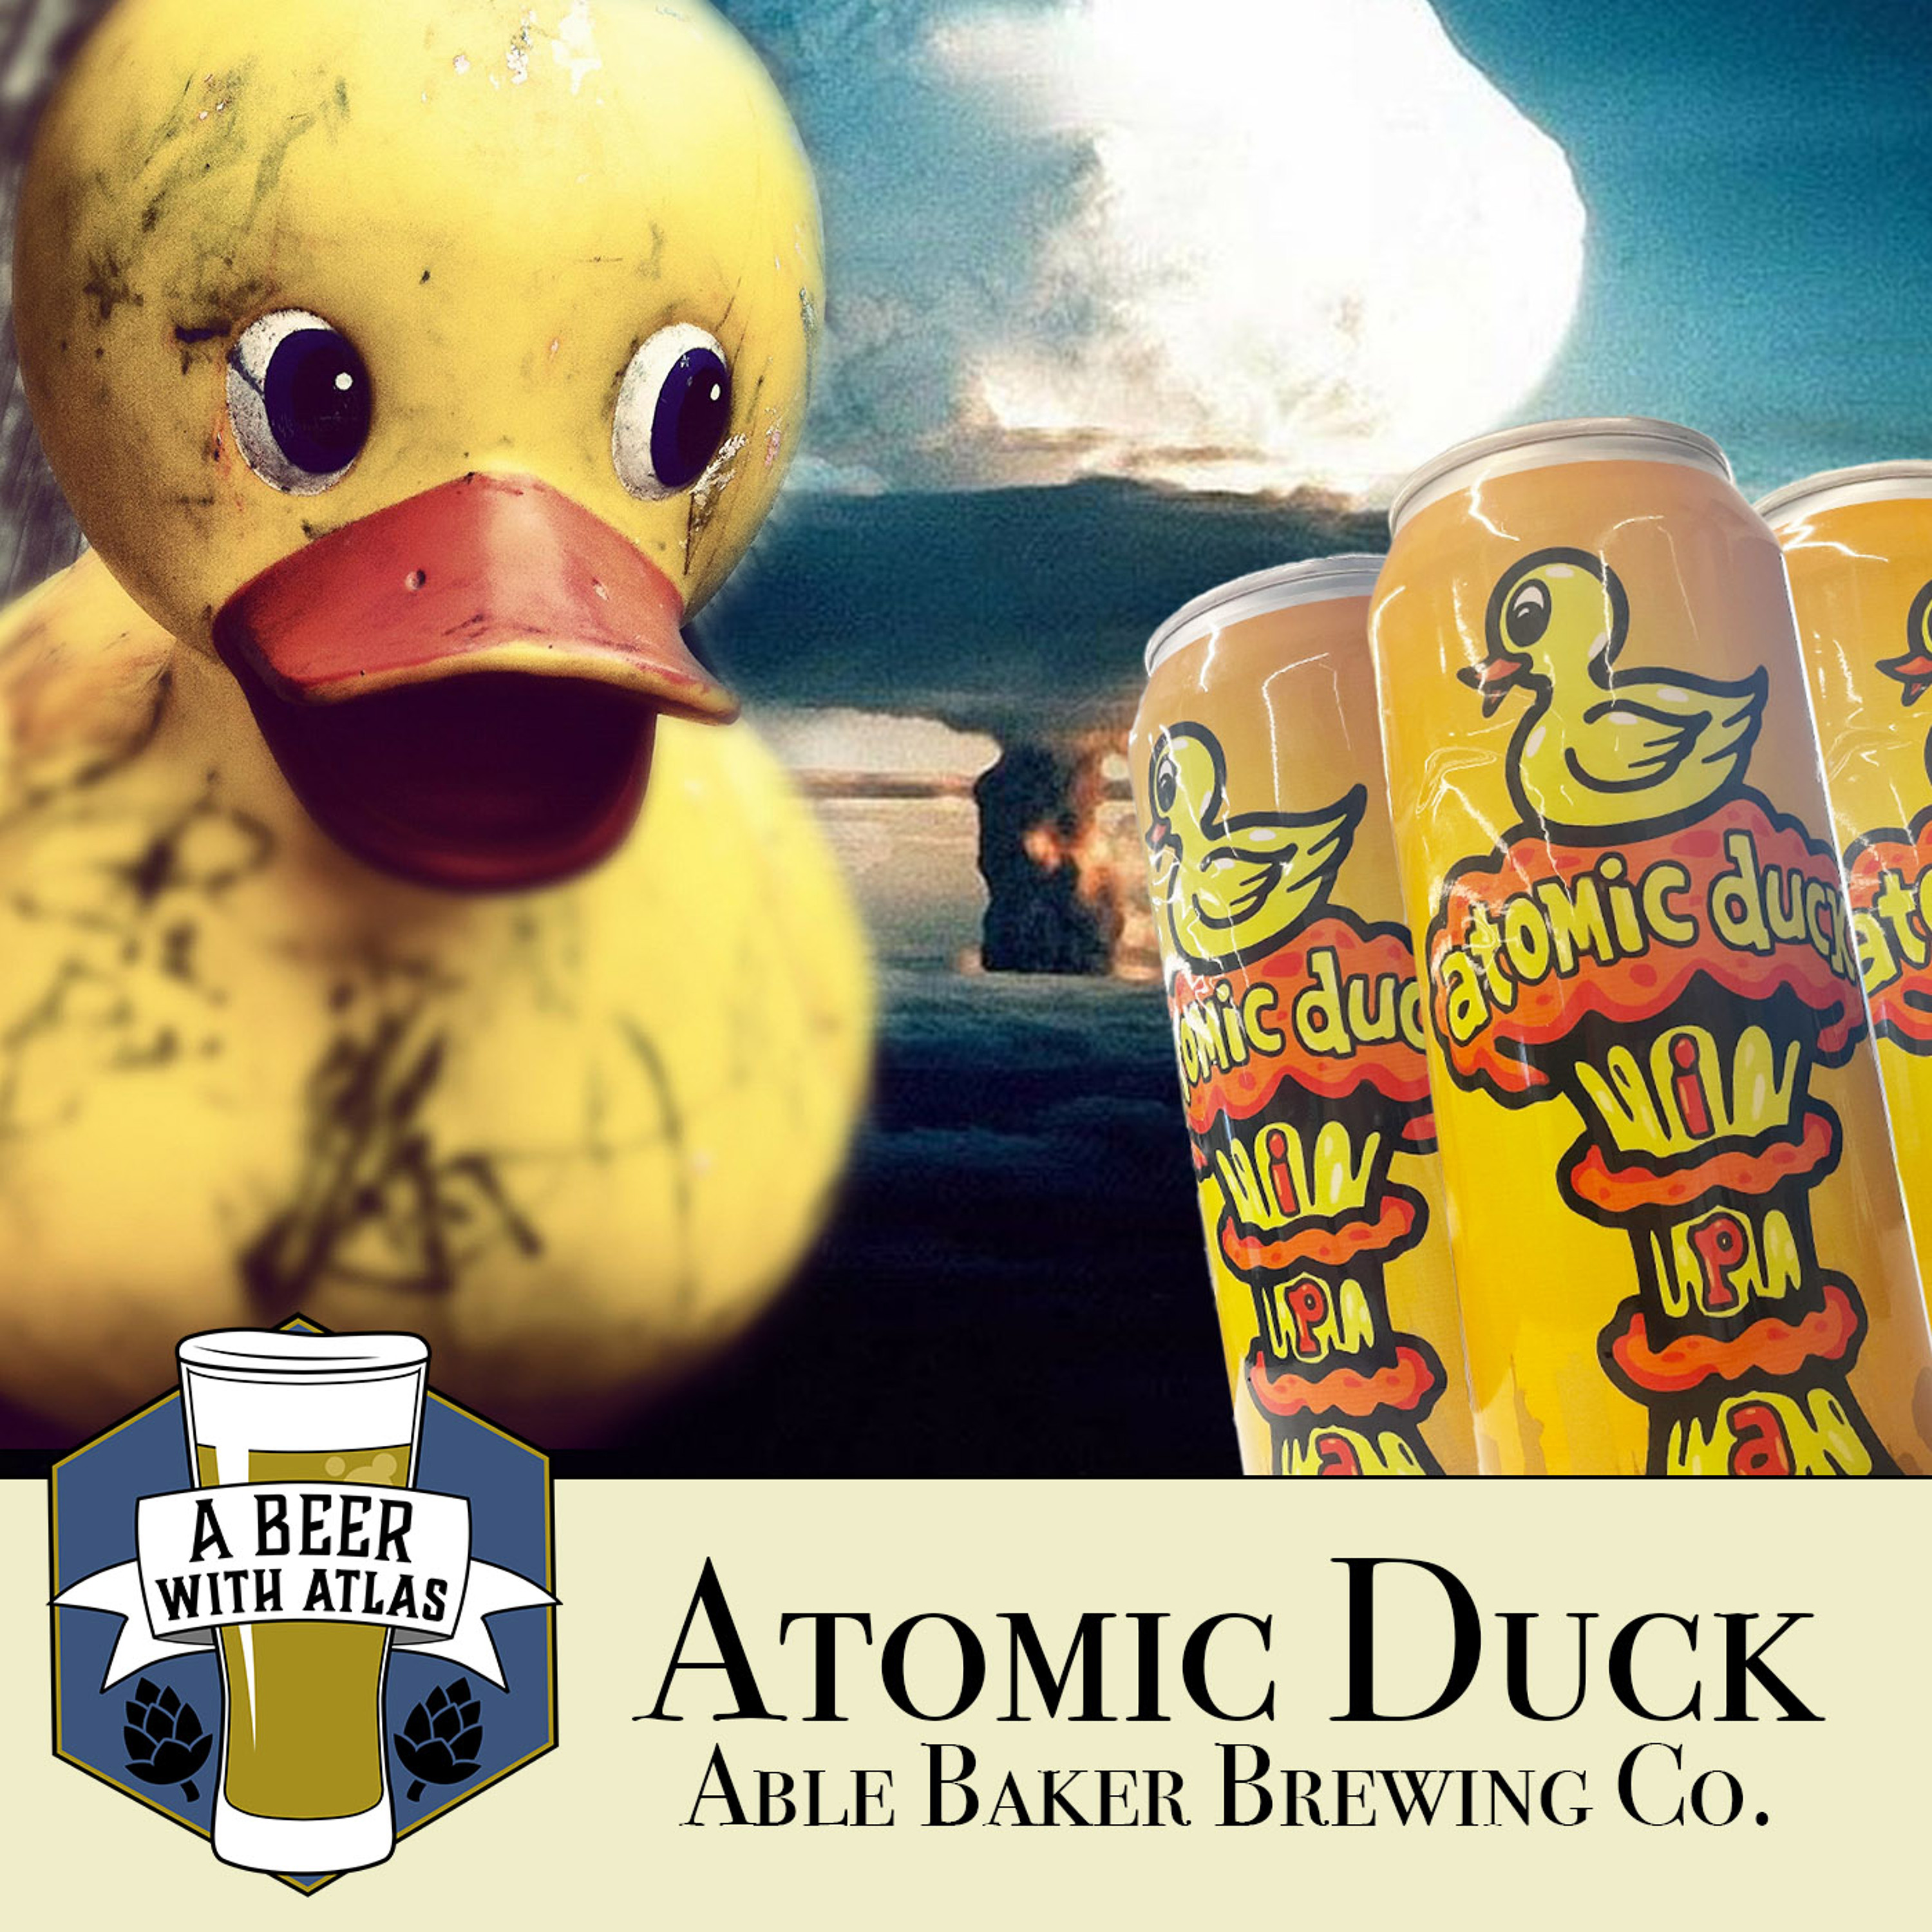 Atomic Duck by Able Baker Brewing Company - A Beer with Atlas 198